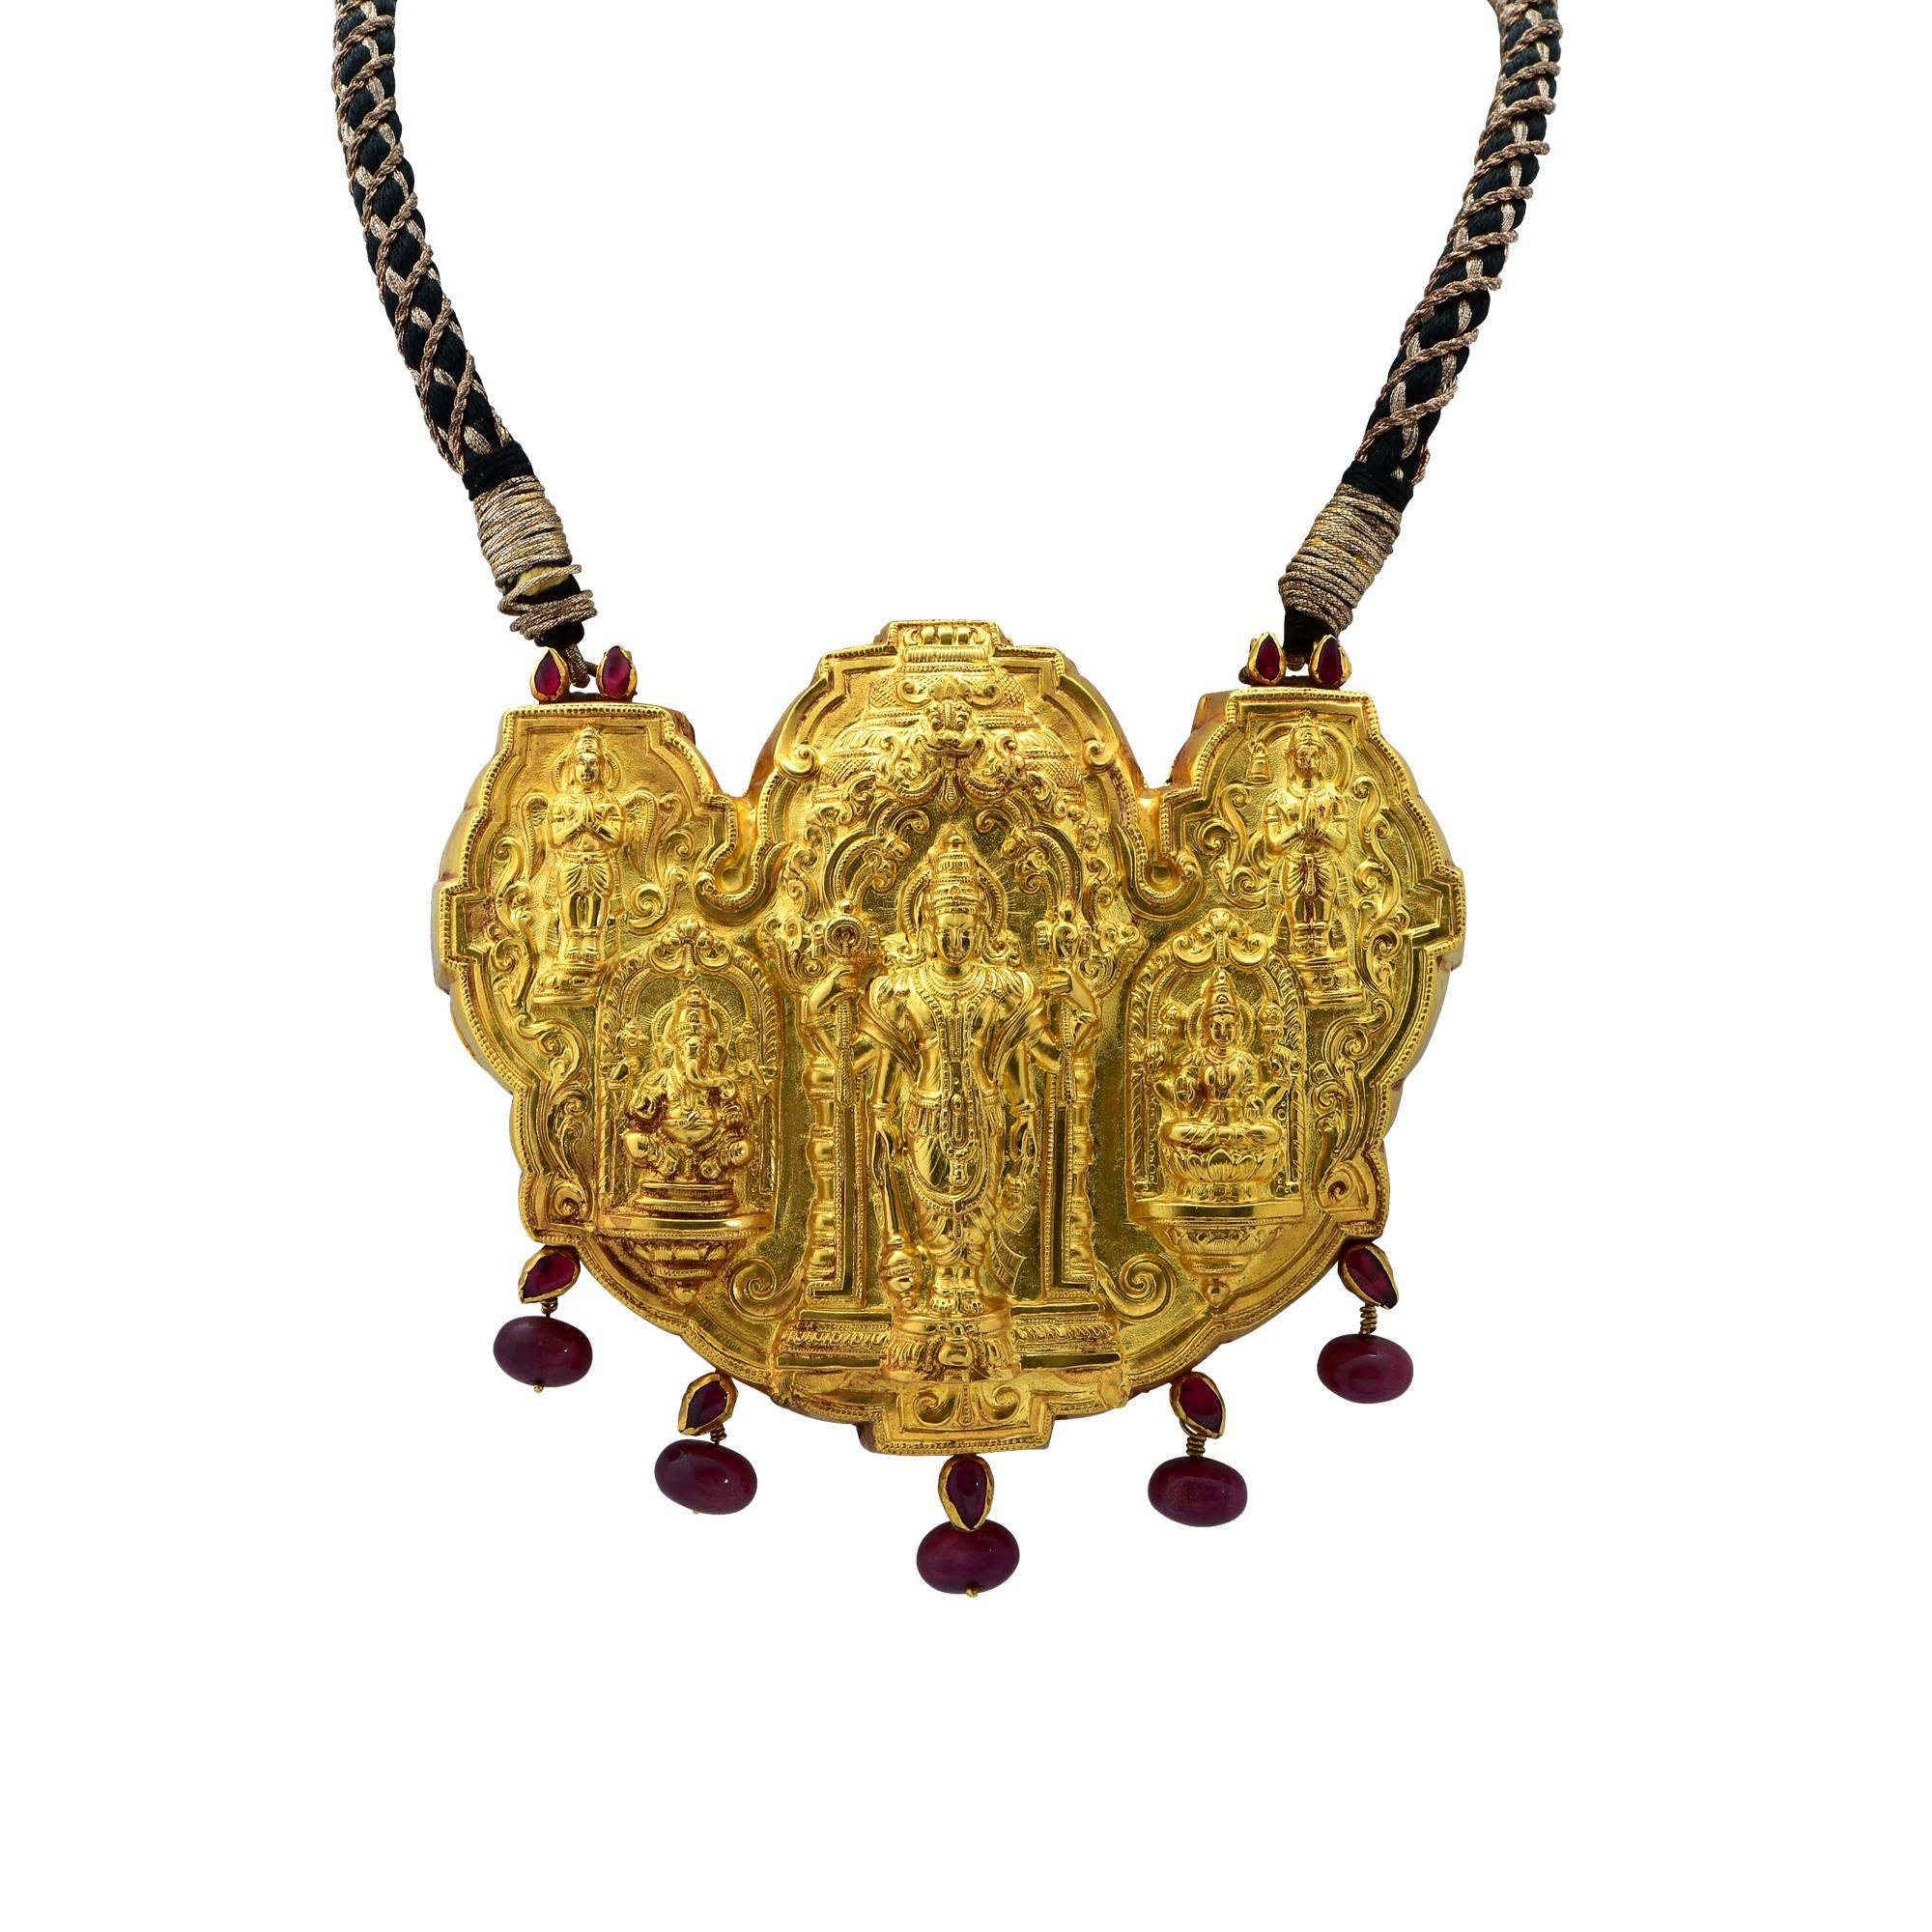 This gorgeous wedding Indian Temple necklace features images of Hindu Deities crafted in 22K Yellow Gold, telling a story rich in symbolism. The medallion measures 4.27 inches long and 3.45 inches high. It hangs off a black and gold tassel cord. 